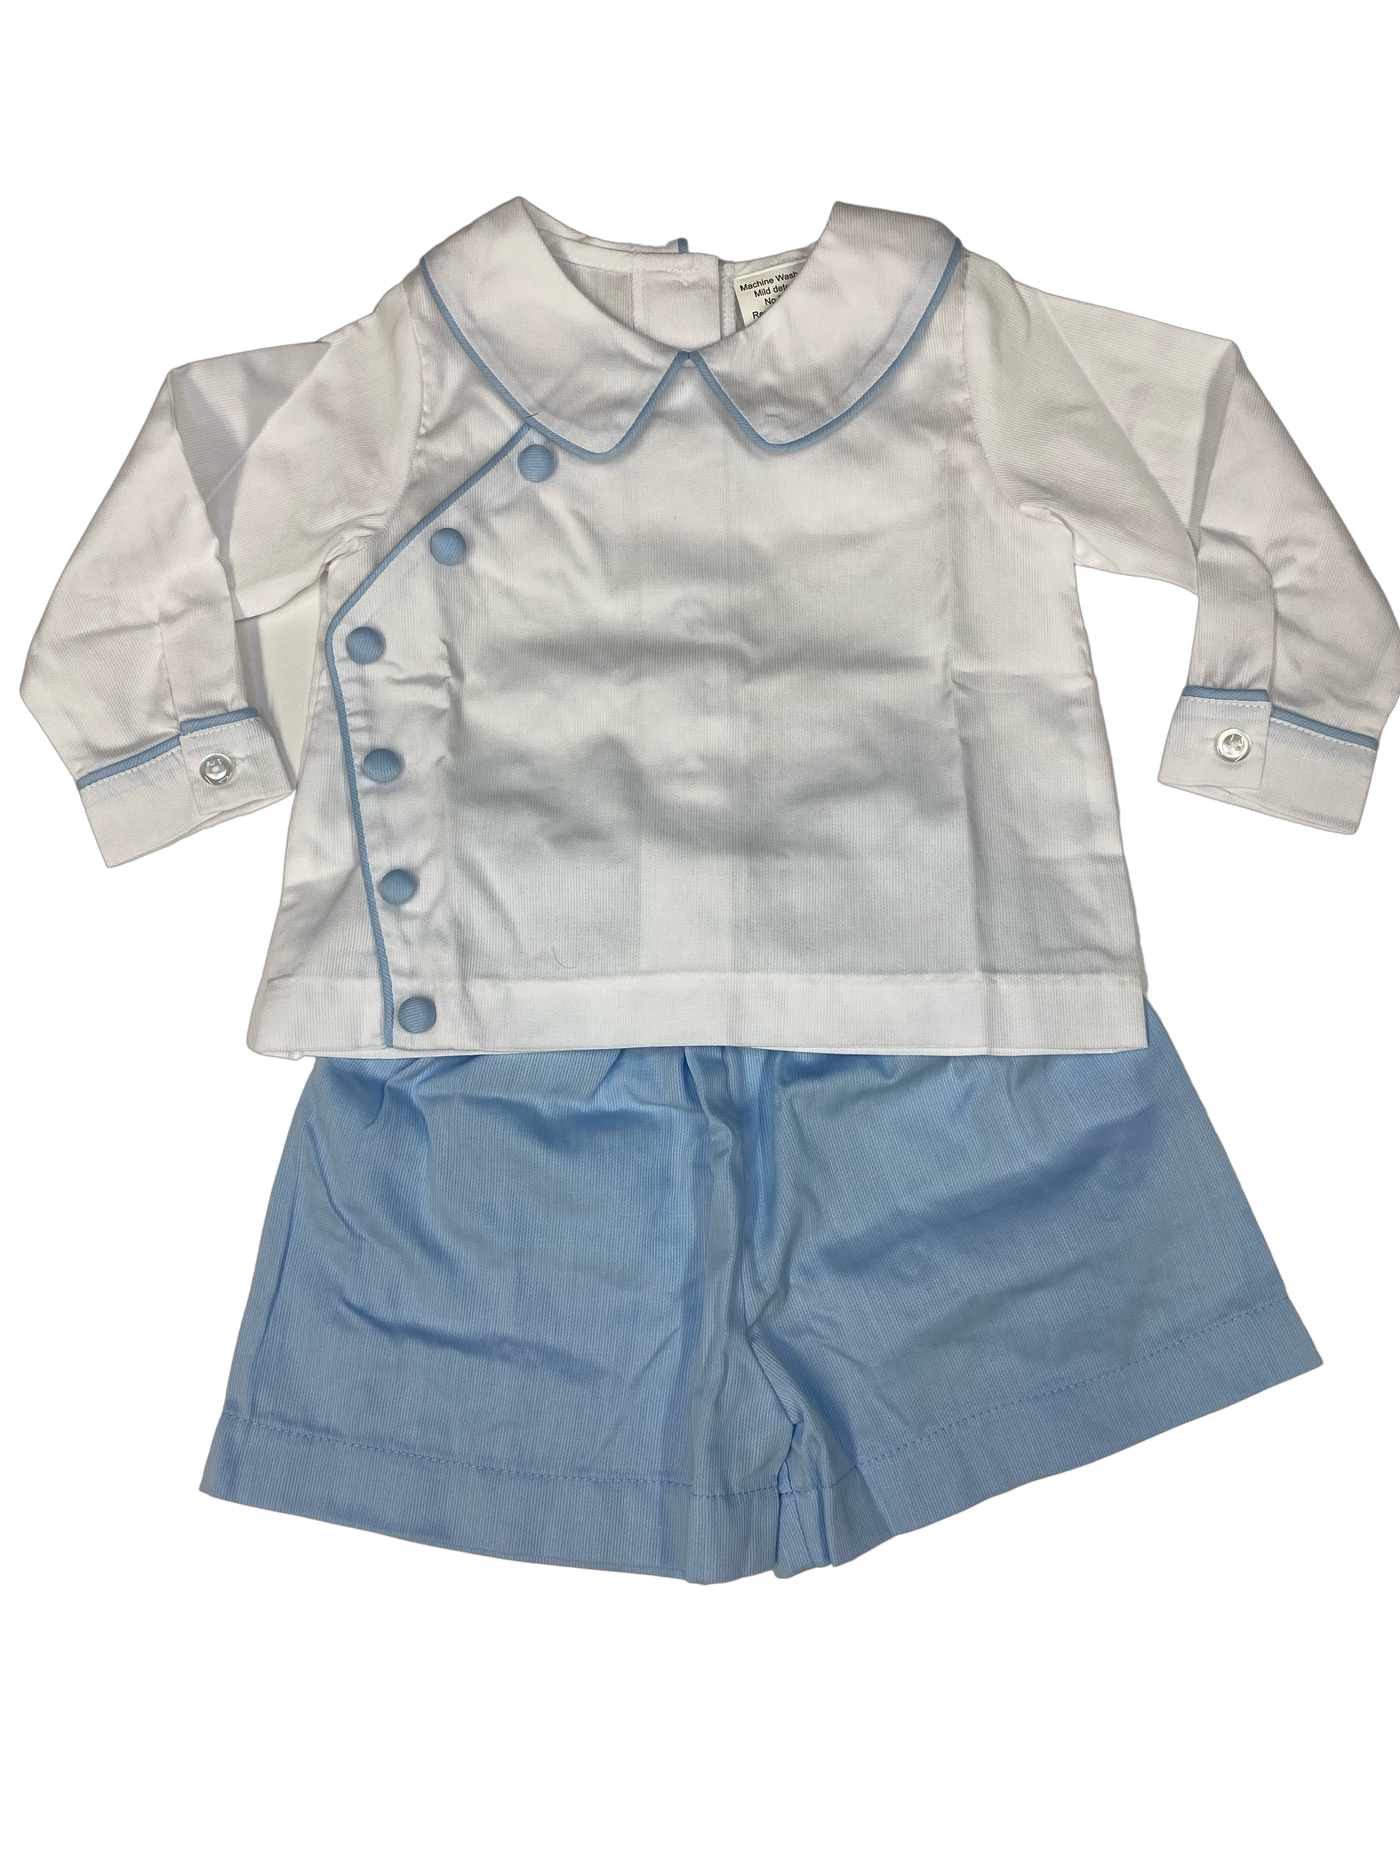 Boys White and Light Blue Collared button top and Short set - Mumzie's Children